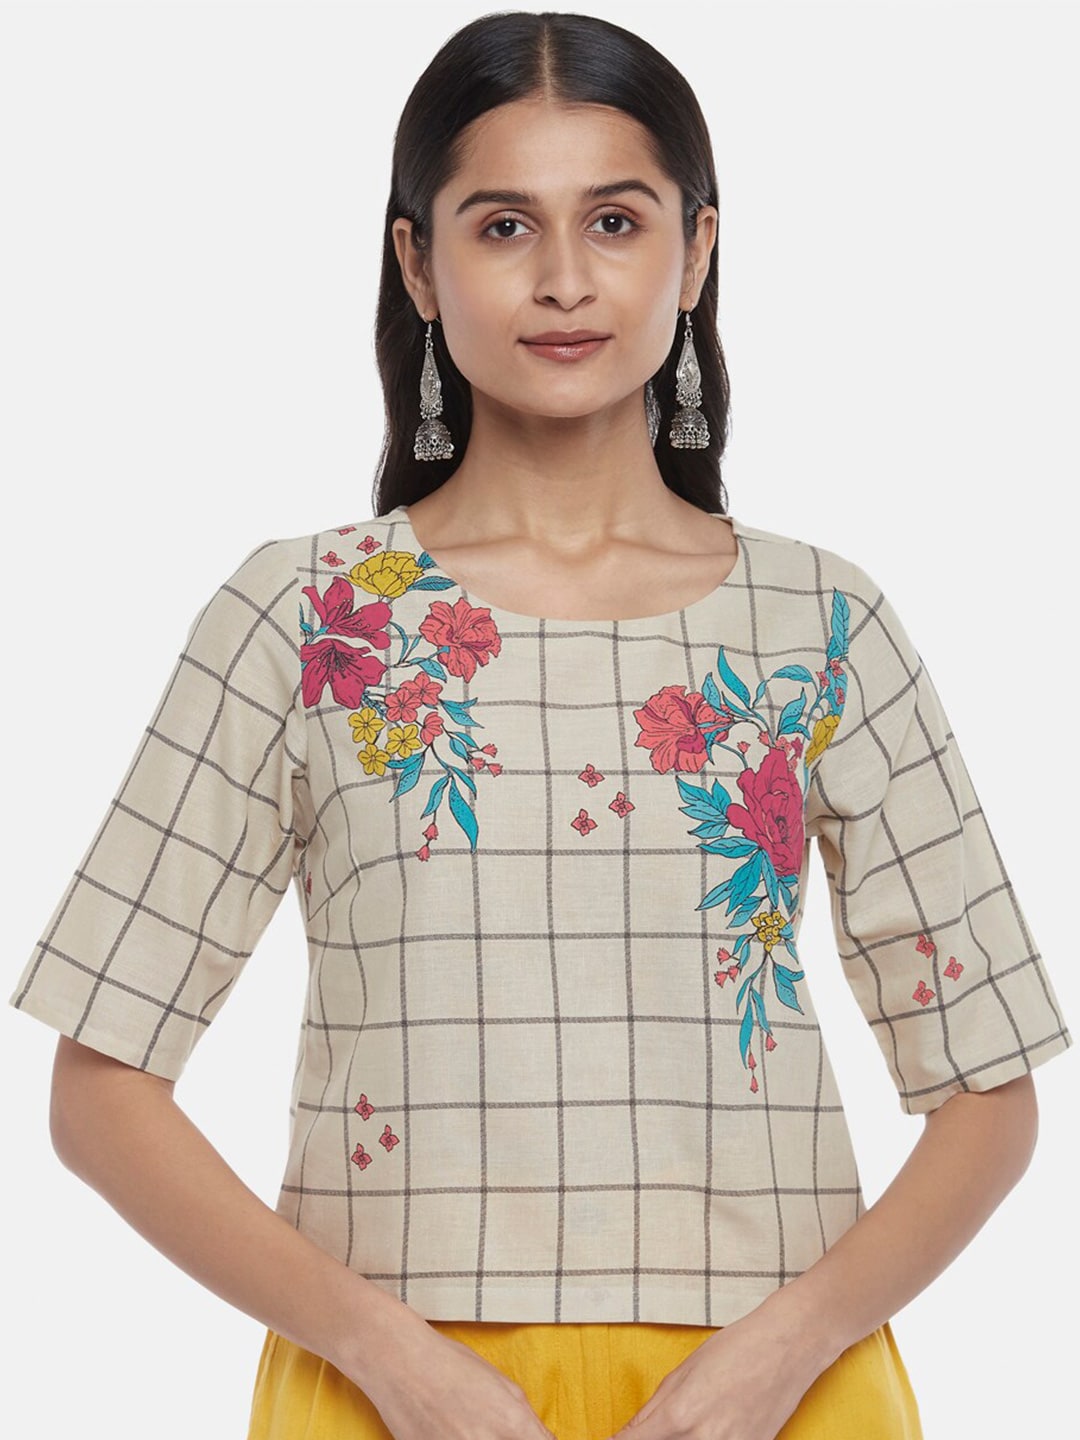 AKKRITI BY PANTALOONS Off White Checked Top Price in India